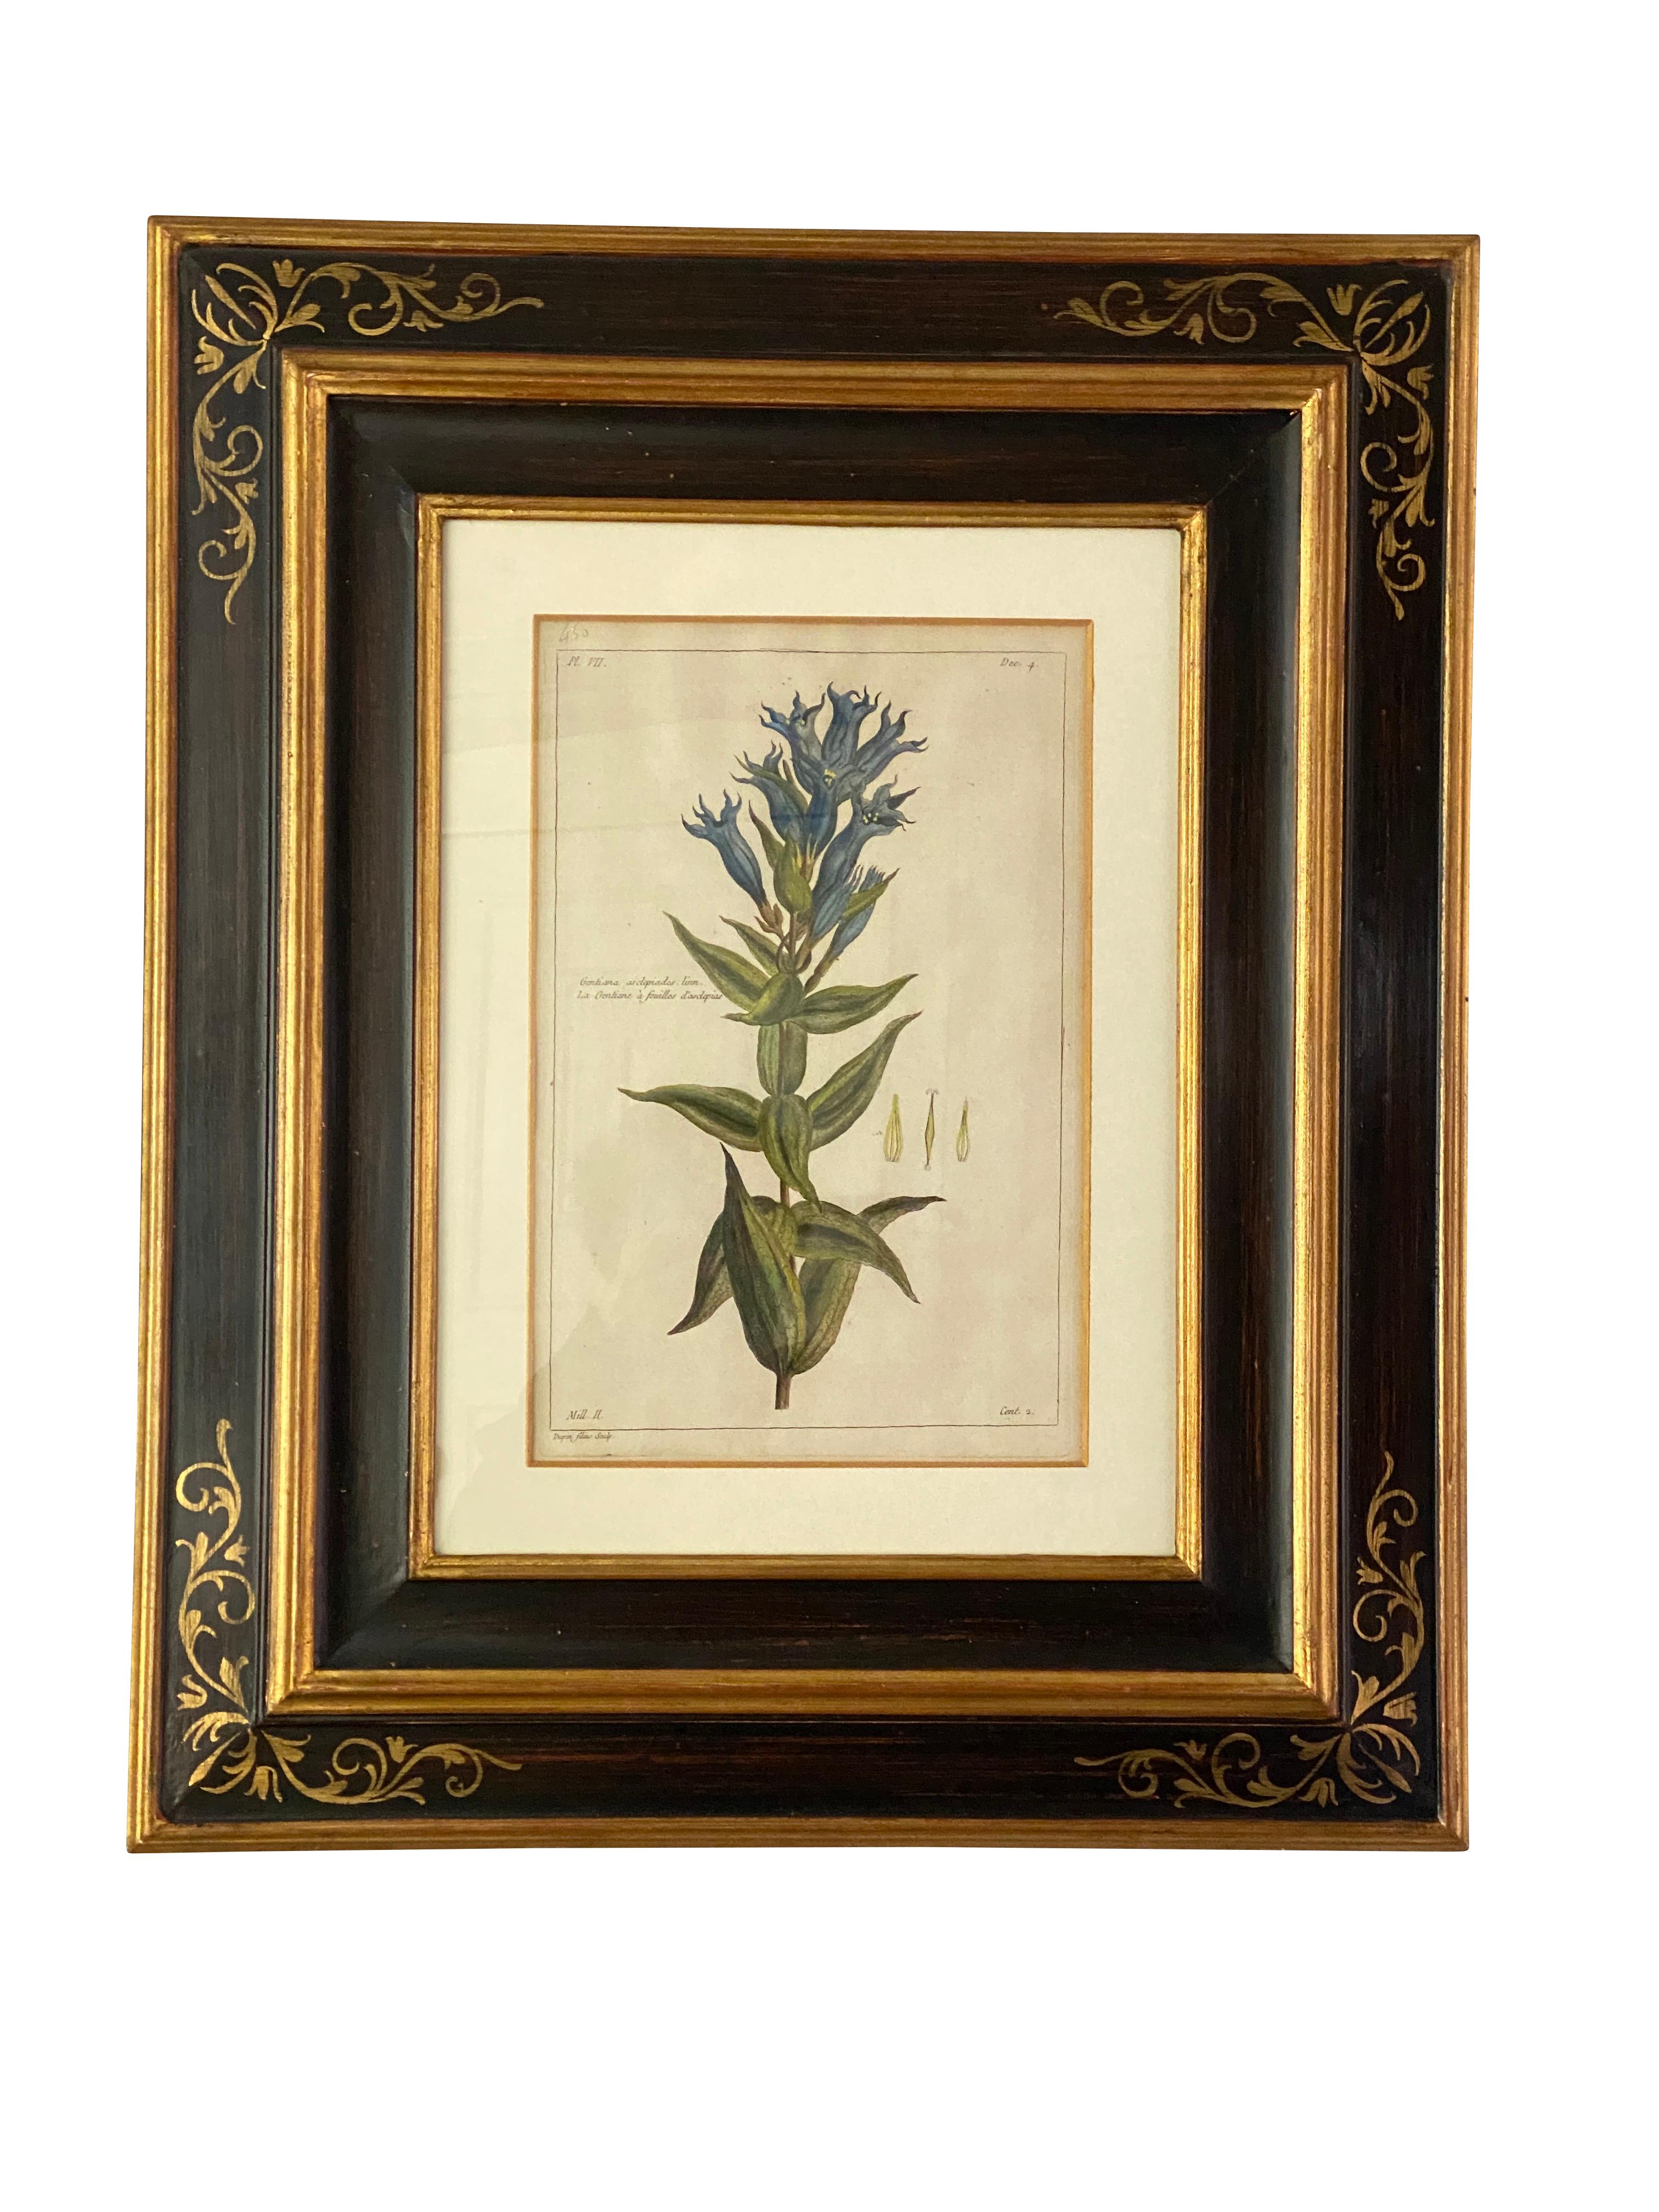 Beautifully framed hand colored engravings.